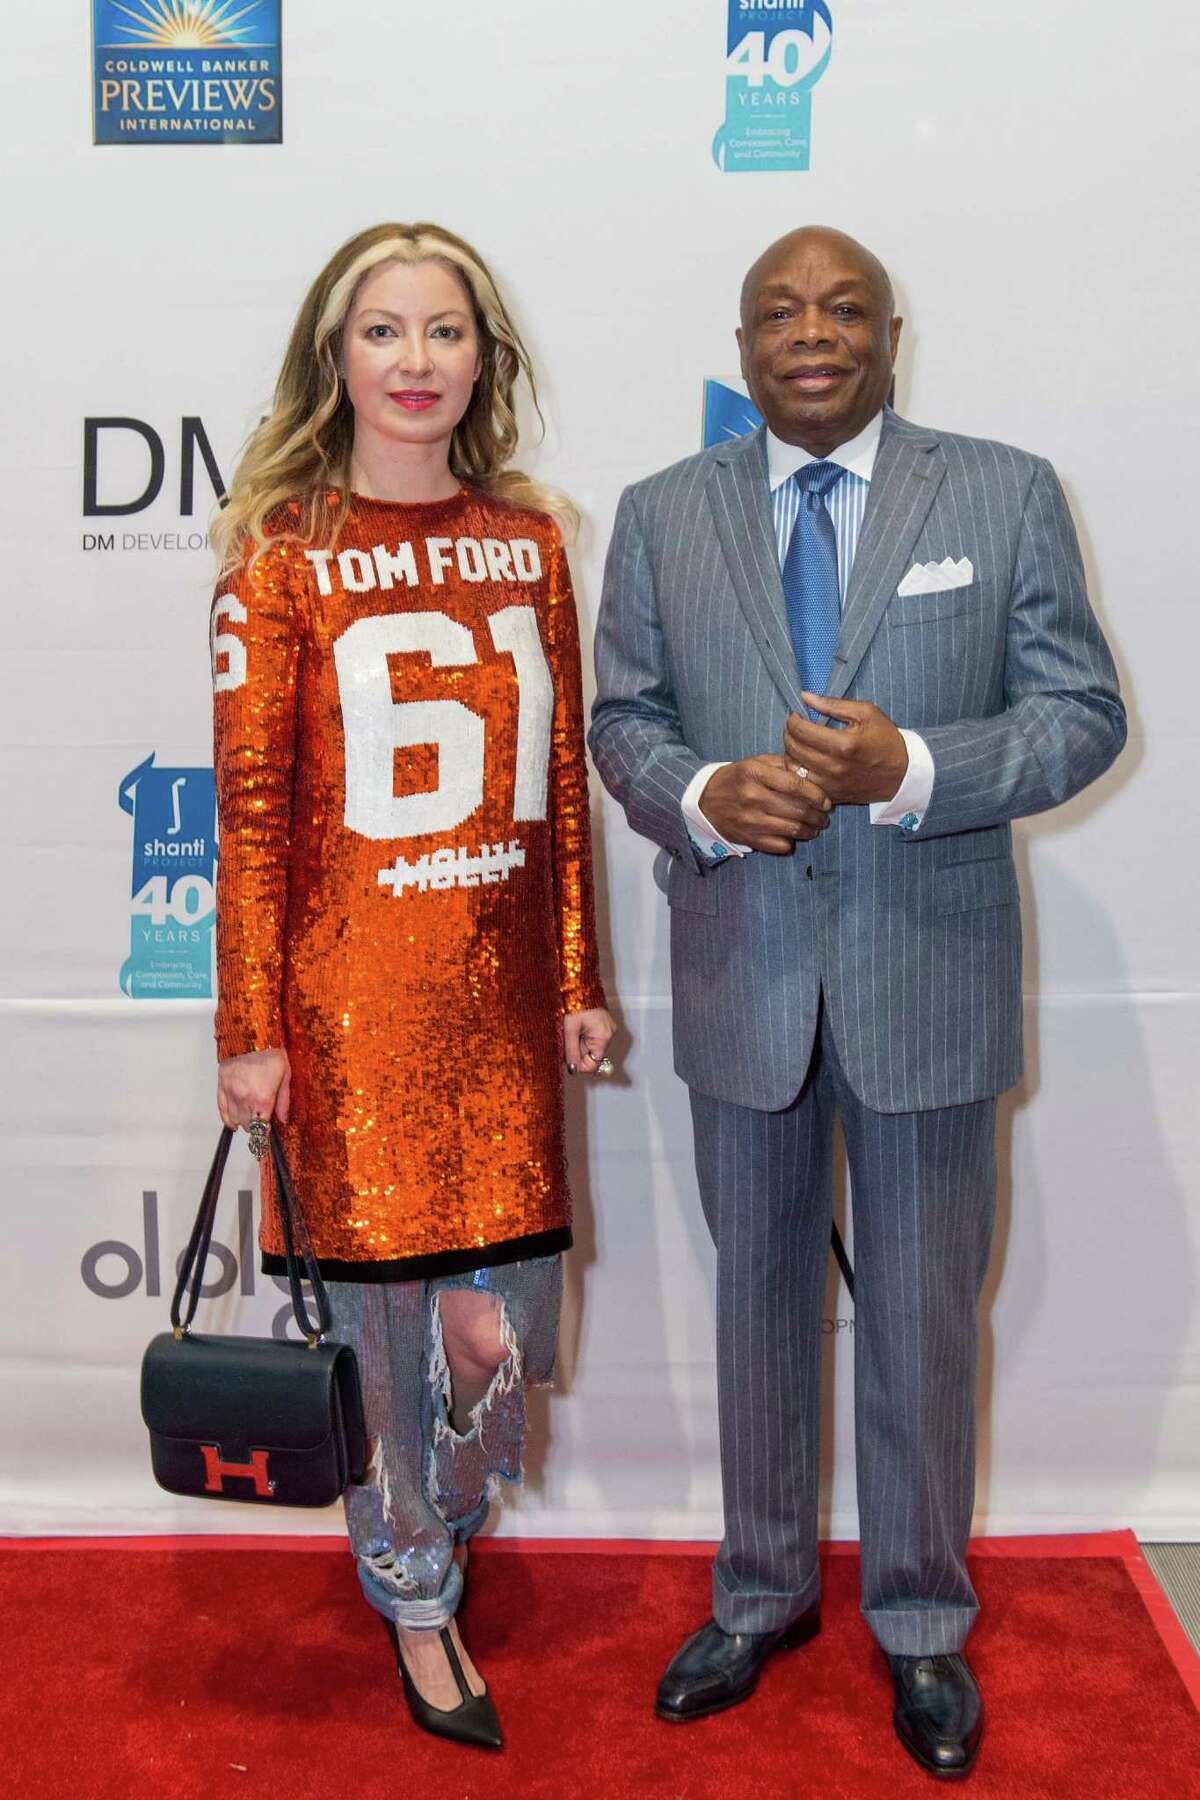 Sonya Molodetskaya and Willie Brown at the red carpet opening of 8 Octavia on December 17, 2015.